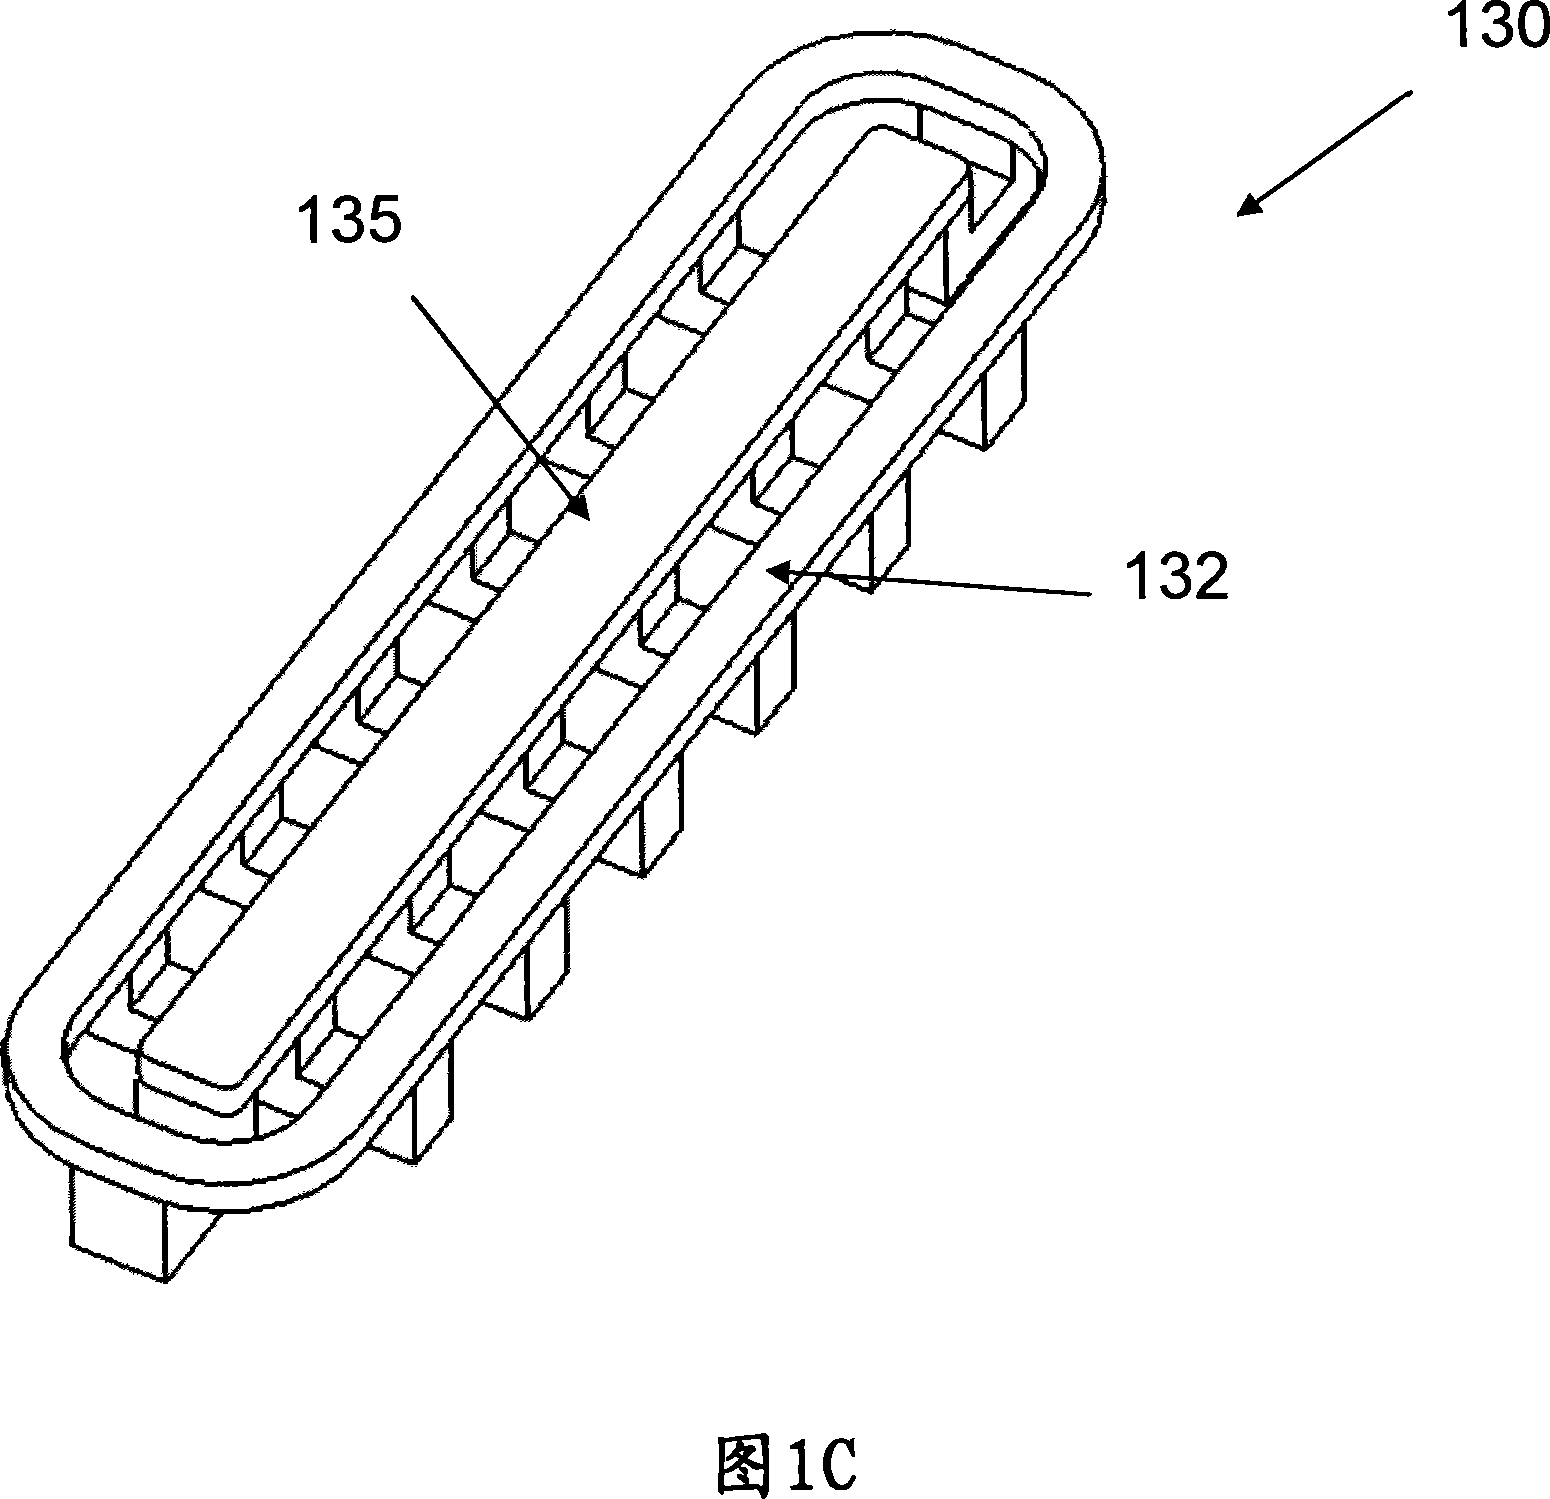 Deposition system and processing system